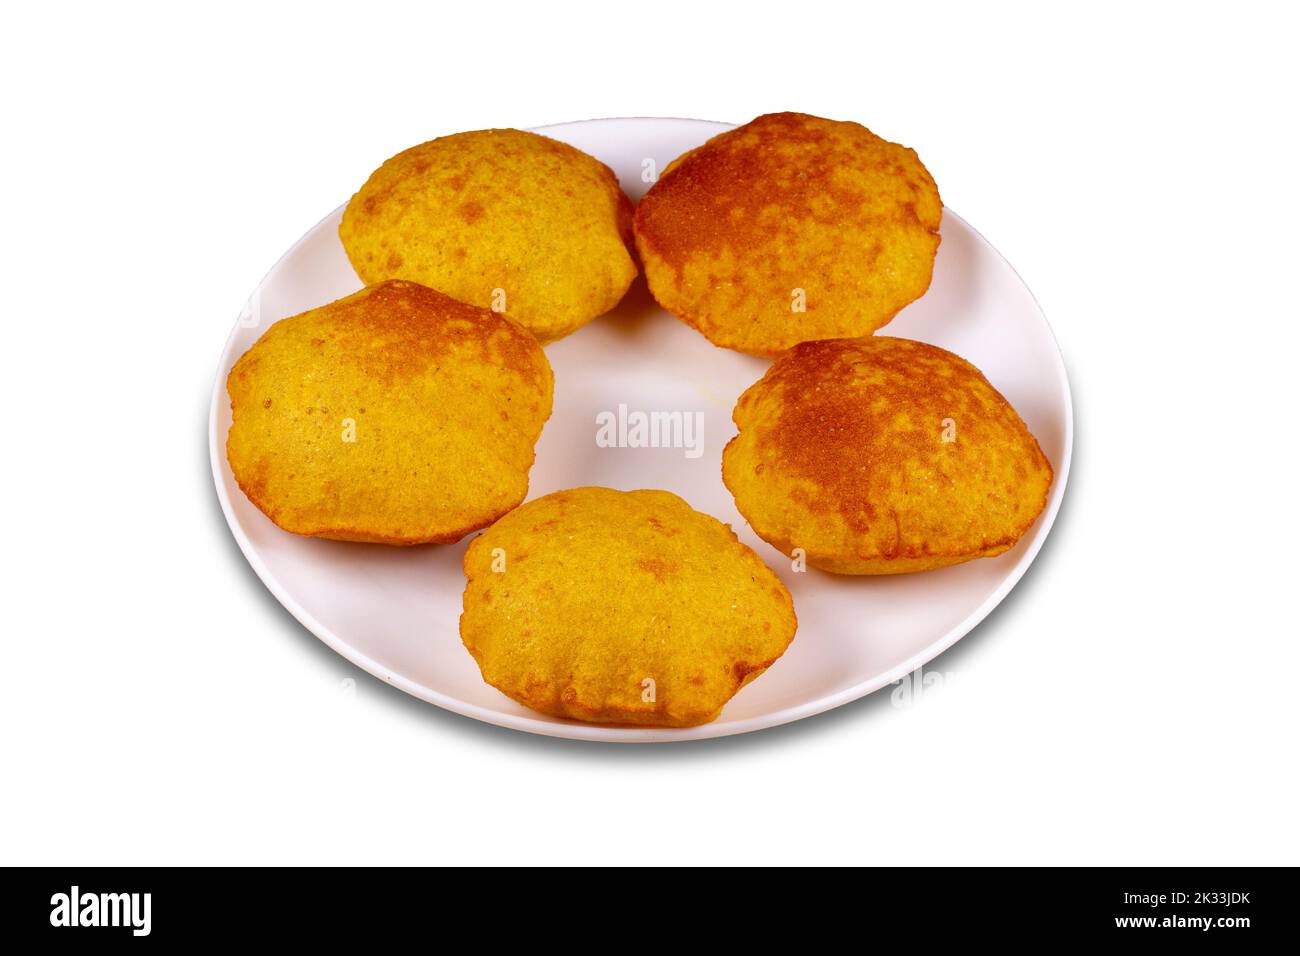 kombadi vade Served in a plate over white background. Selective focus. maharashtrian snacks. Stock Photo